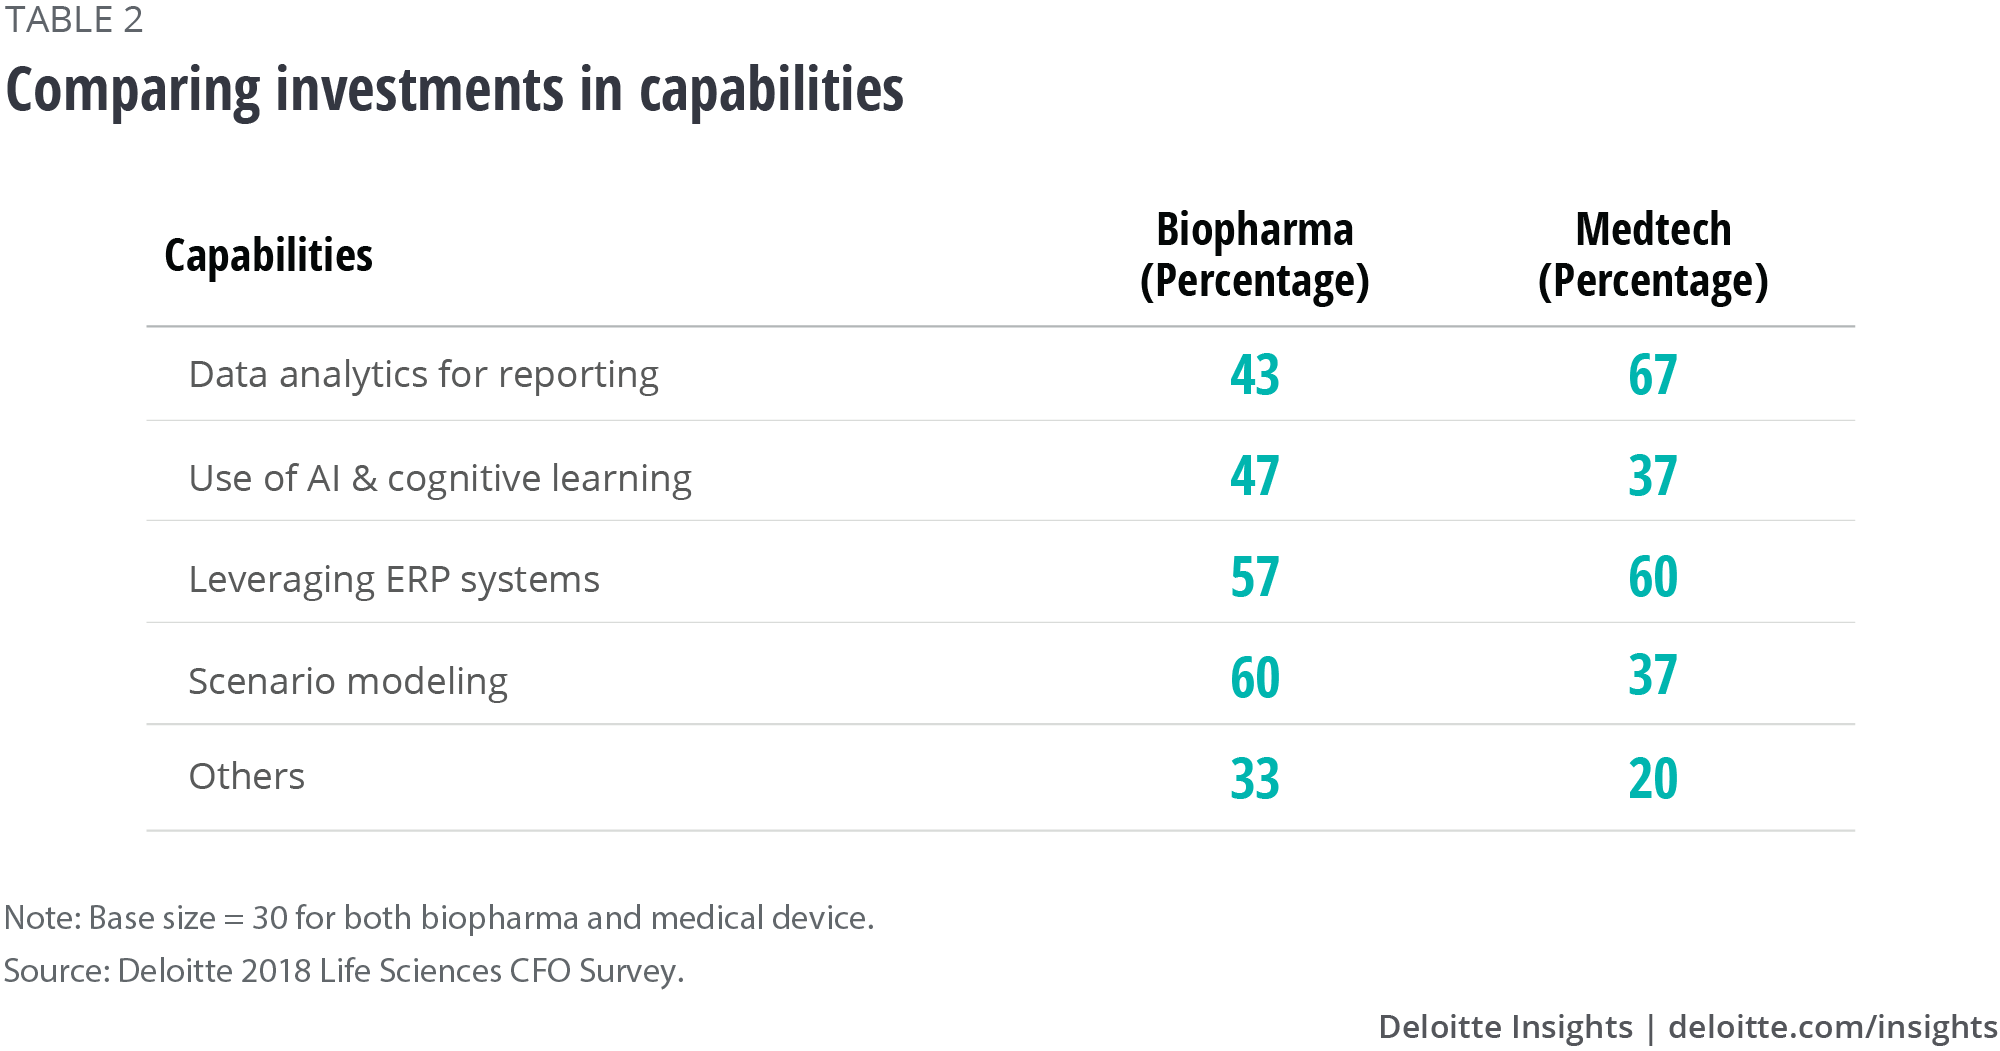 Comparing investments in capabilities